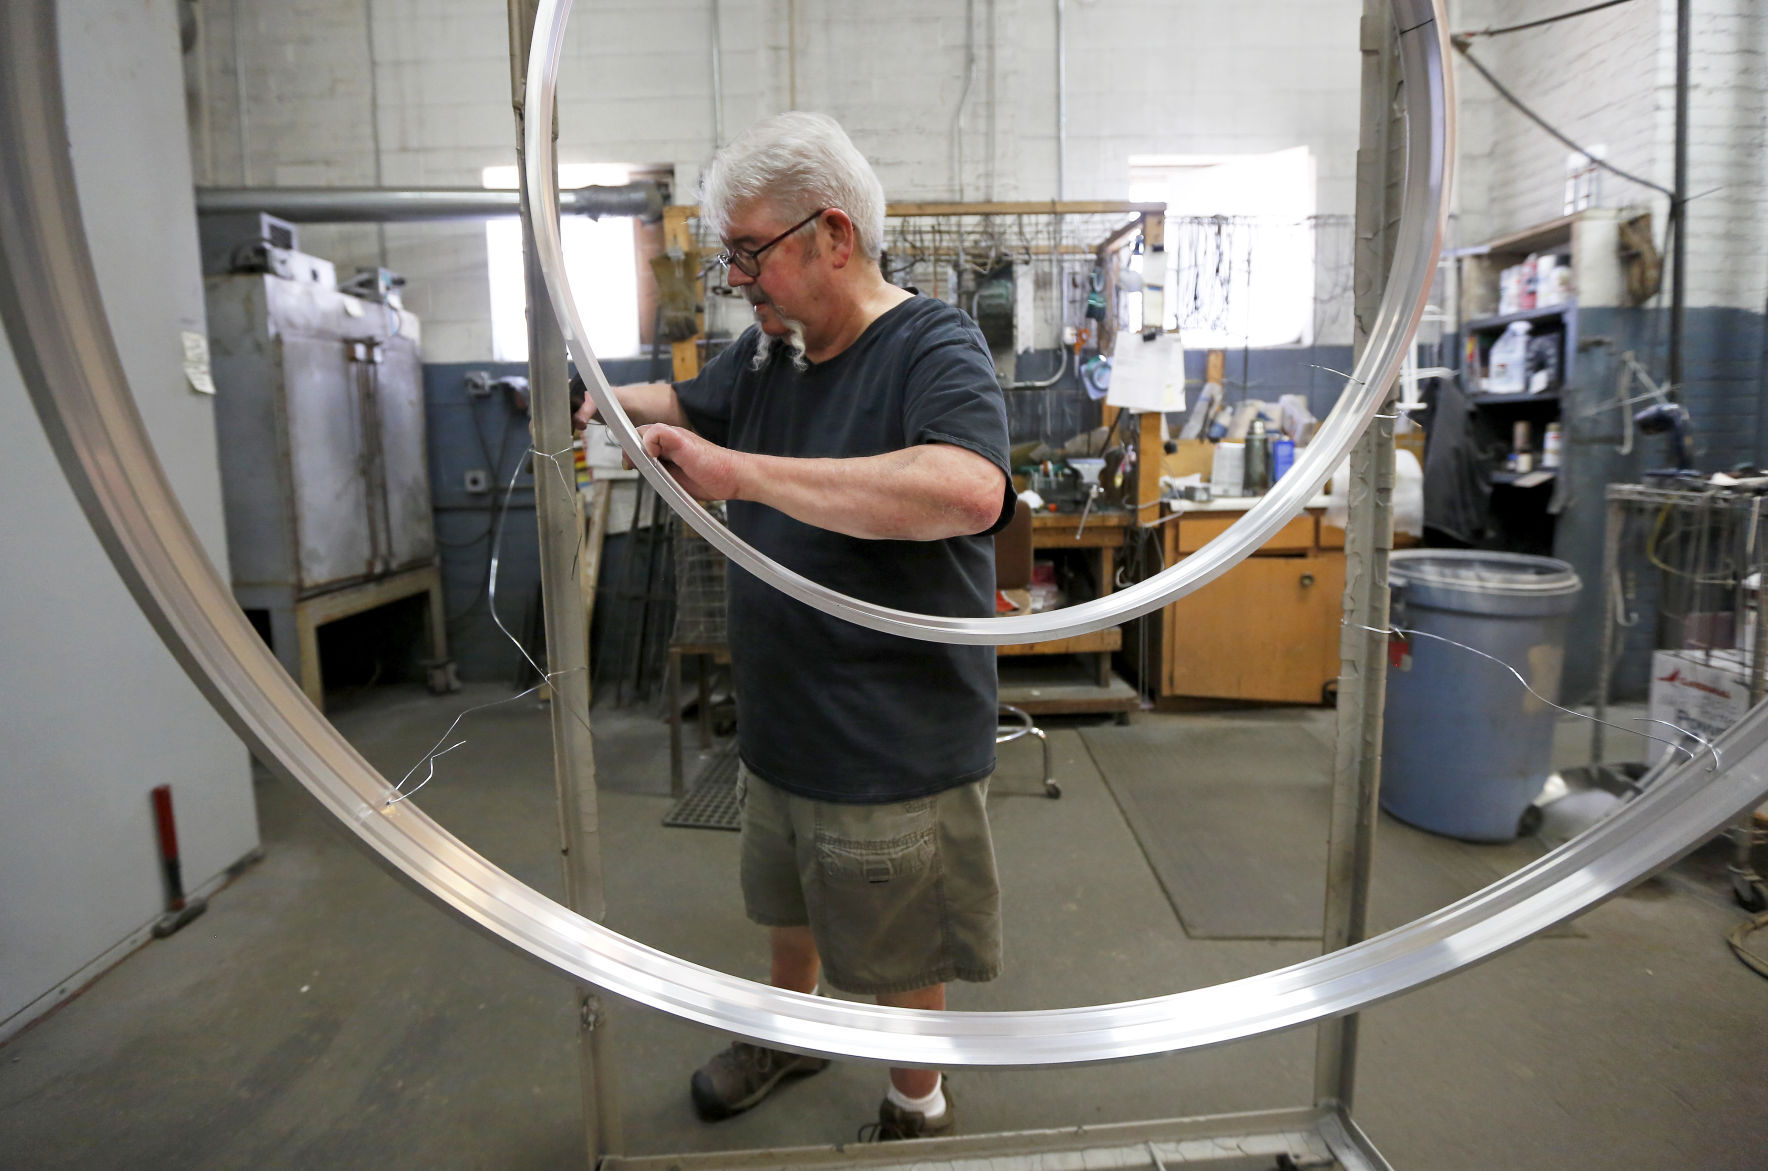 Jim Walch hangs light fixture rims before painting at Fire Farm Lighting. The Elkader, Iowa, business creates custom lighting, with many orders in low numbers. As a result, the company adjusts and figures out ways to fill the requests.Video: TelegraphHerald.com PHOTO CREDIT: EILEEN MESLAR